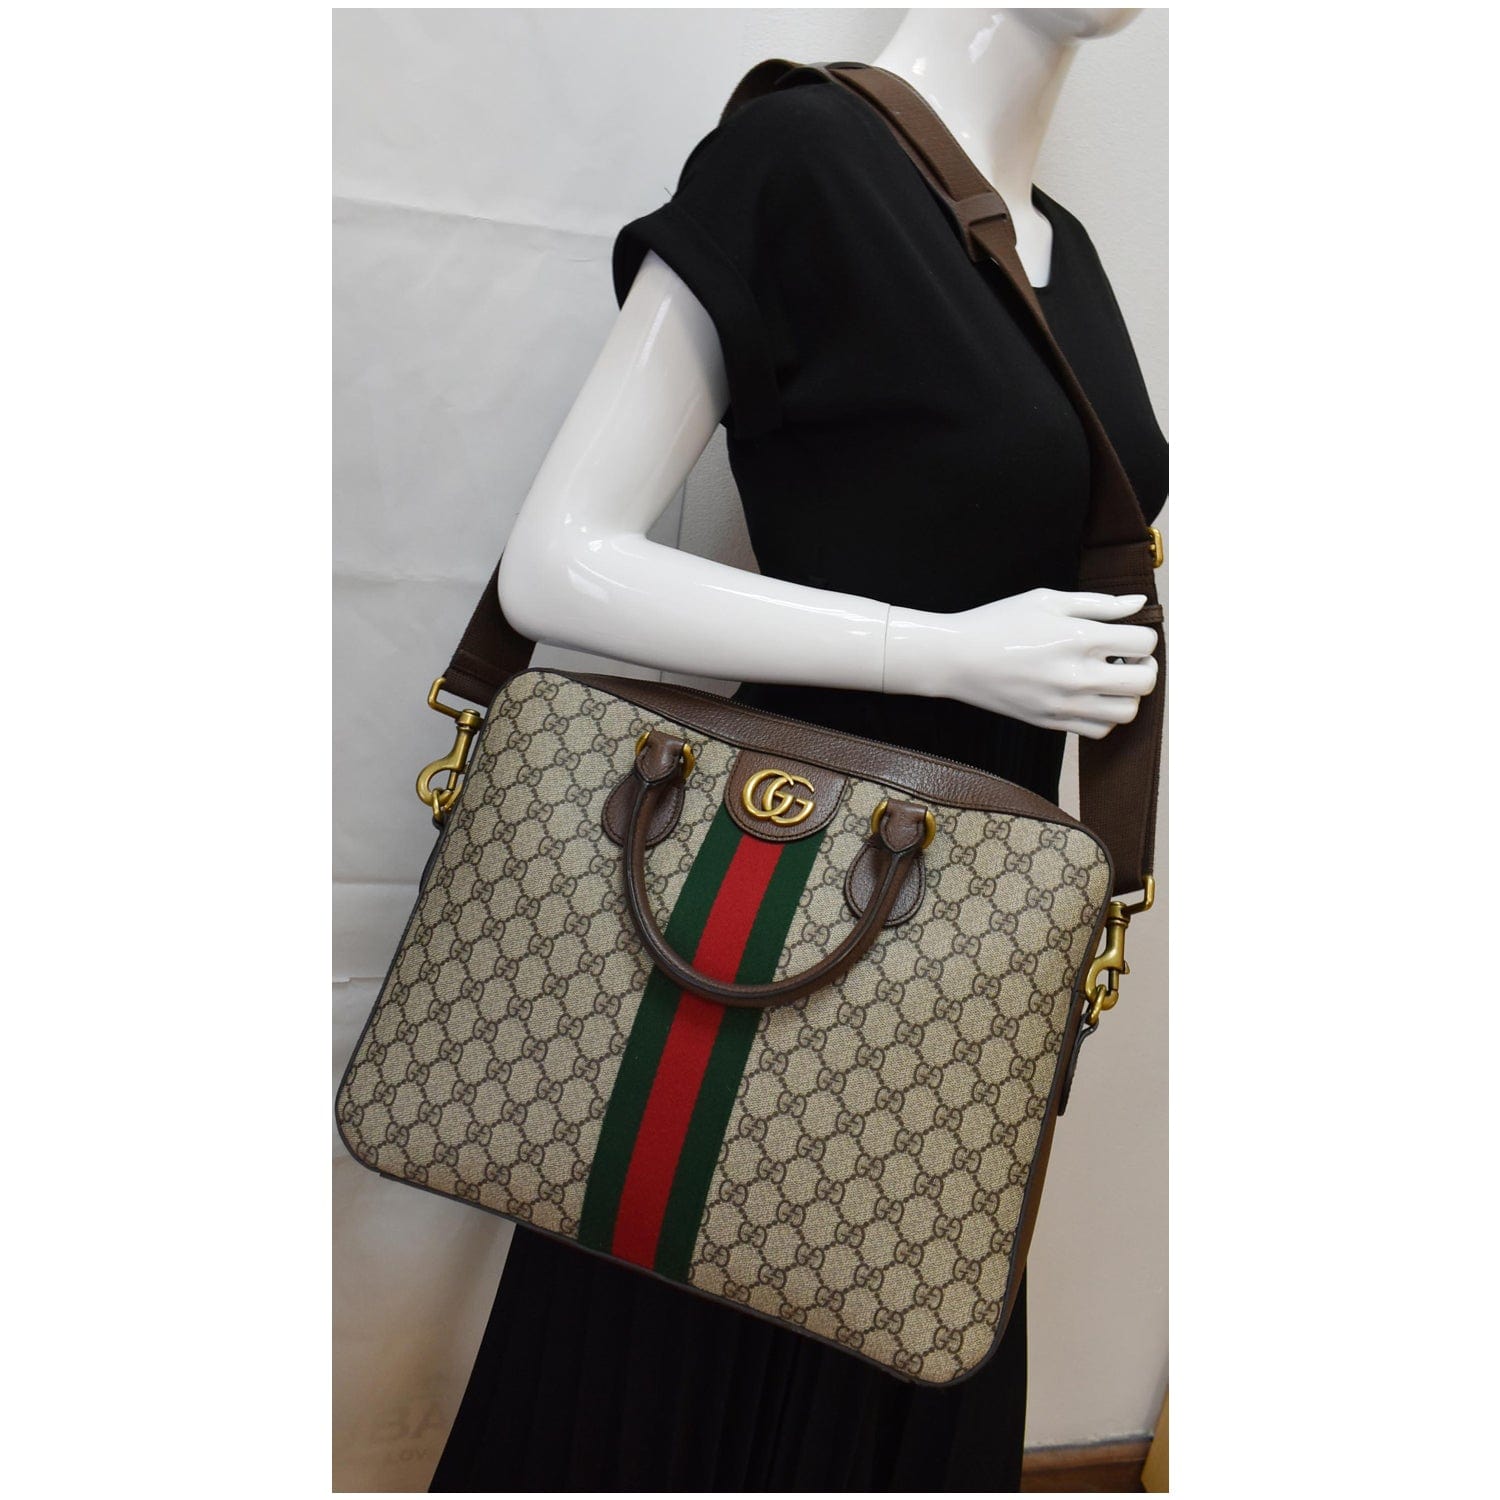 Gucci, Bags, Gucci Laptop Case New Never Used